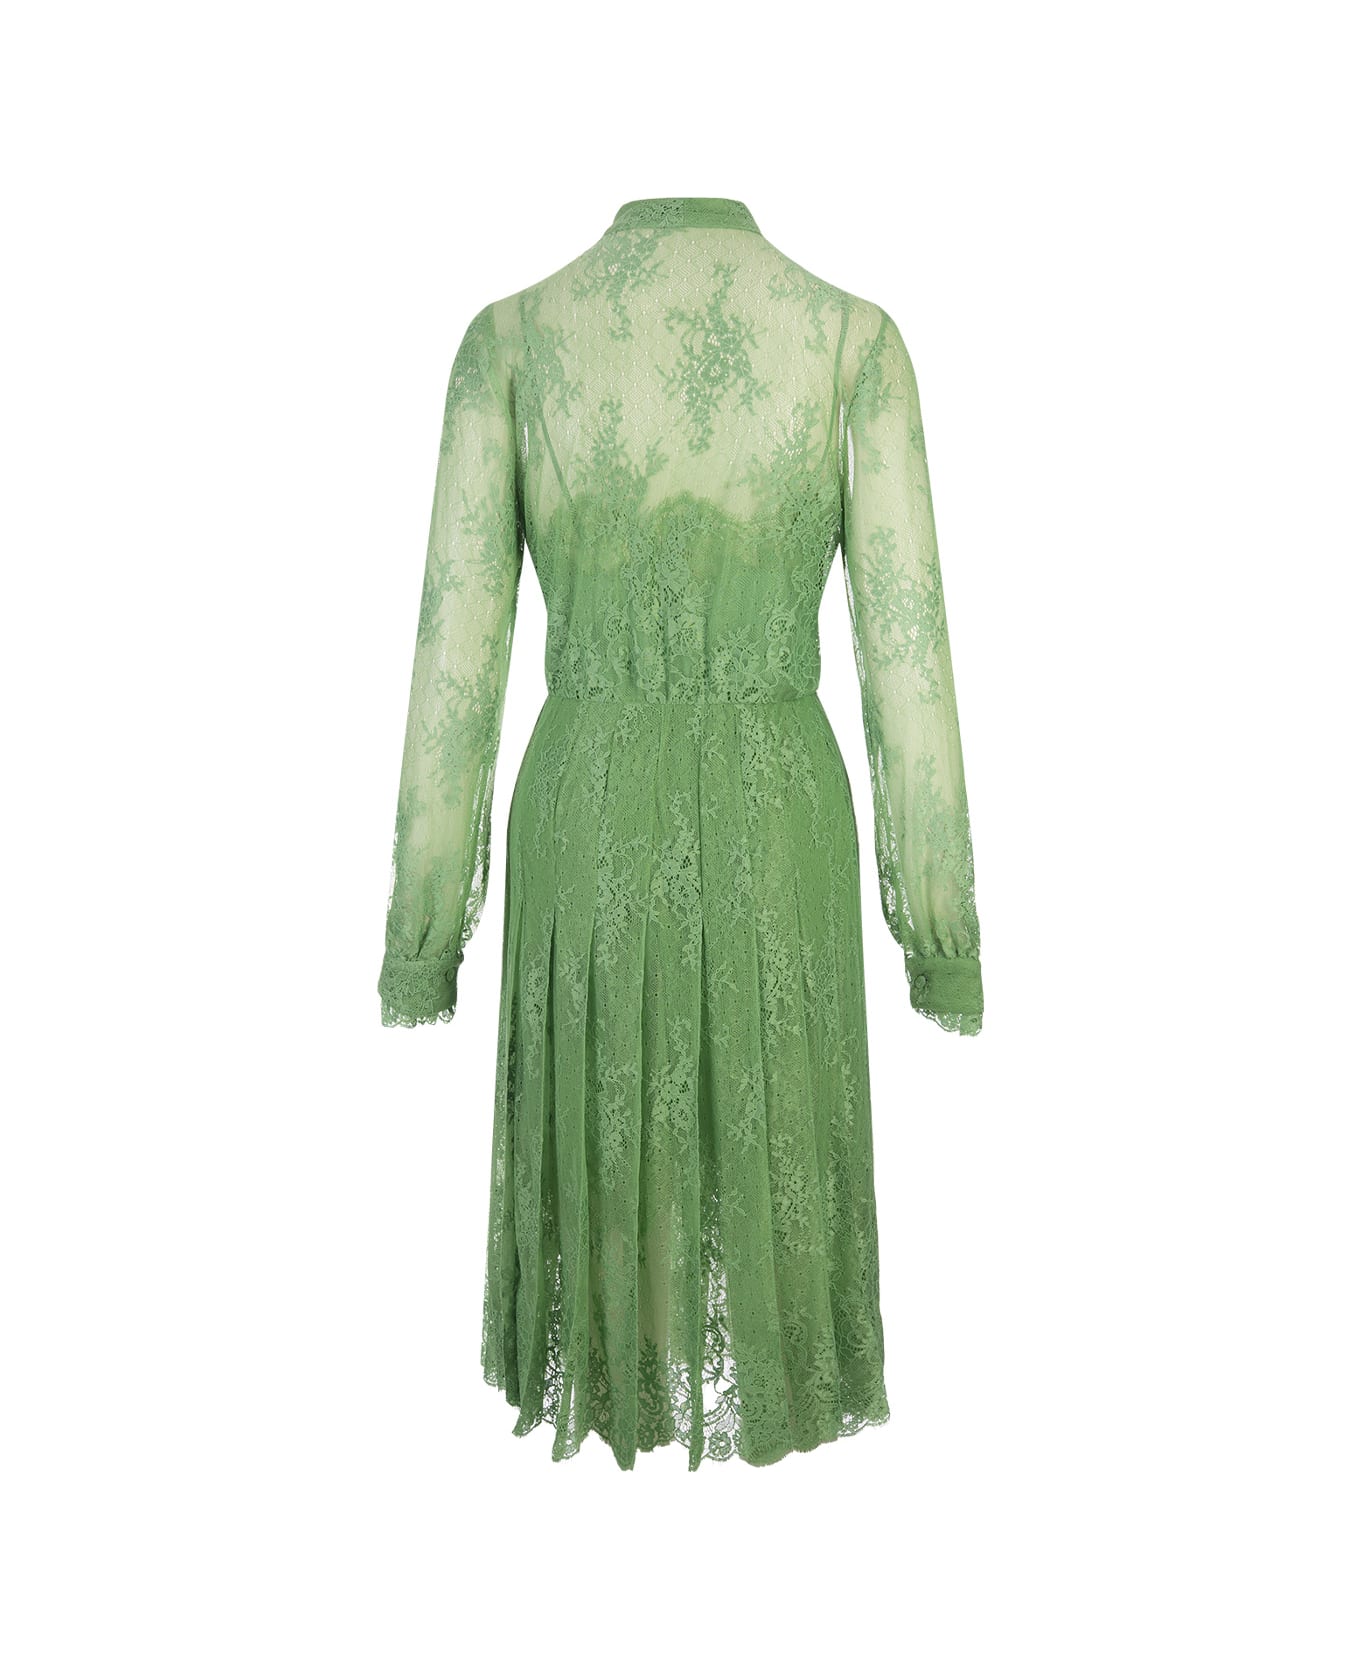 Ermanno Scervino Green Lace Dress With Long Sleeve And Collar Bow - Green